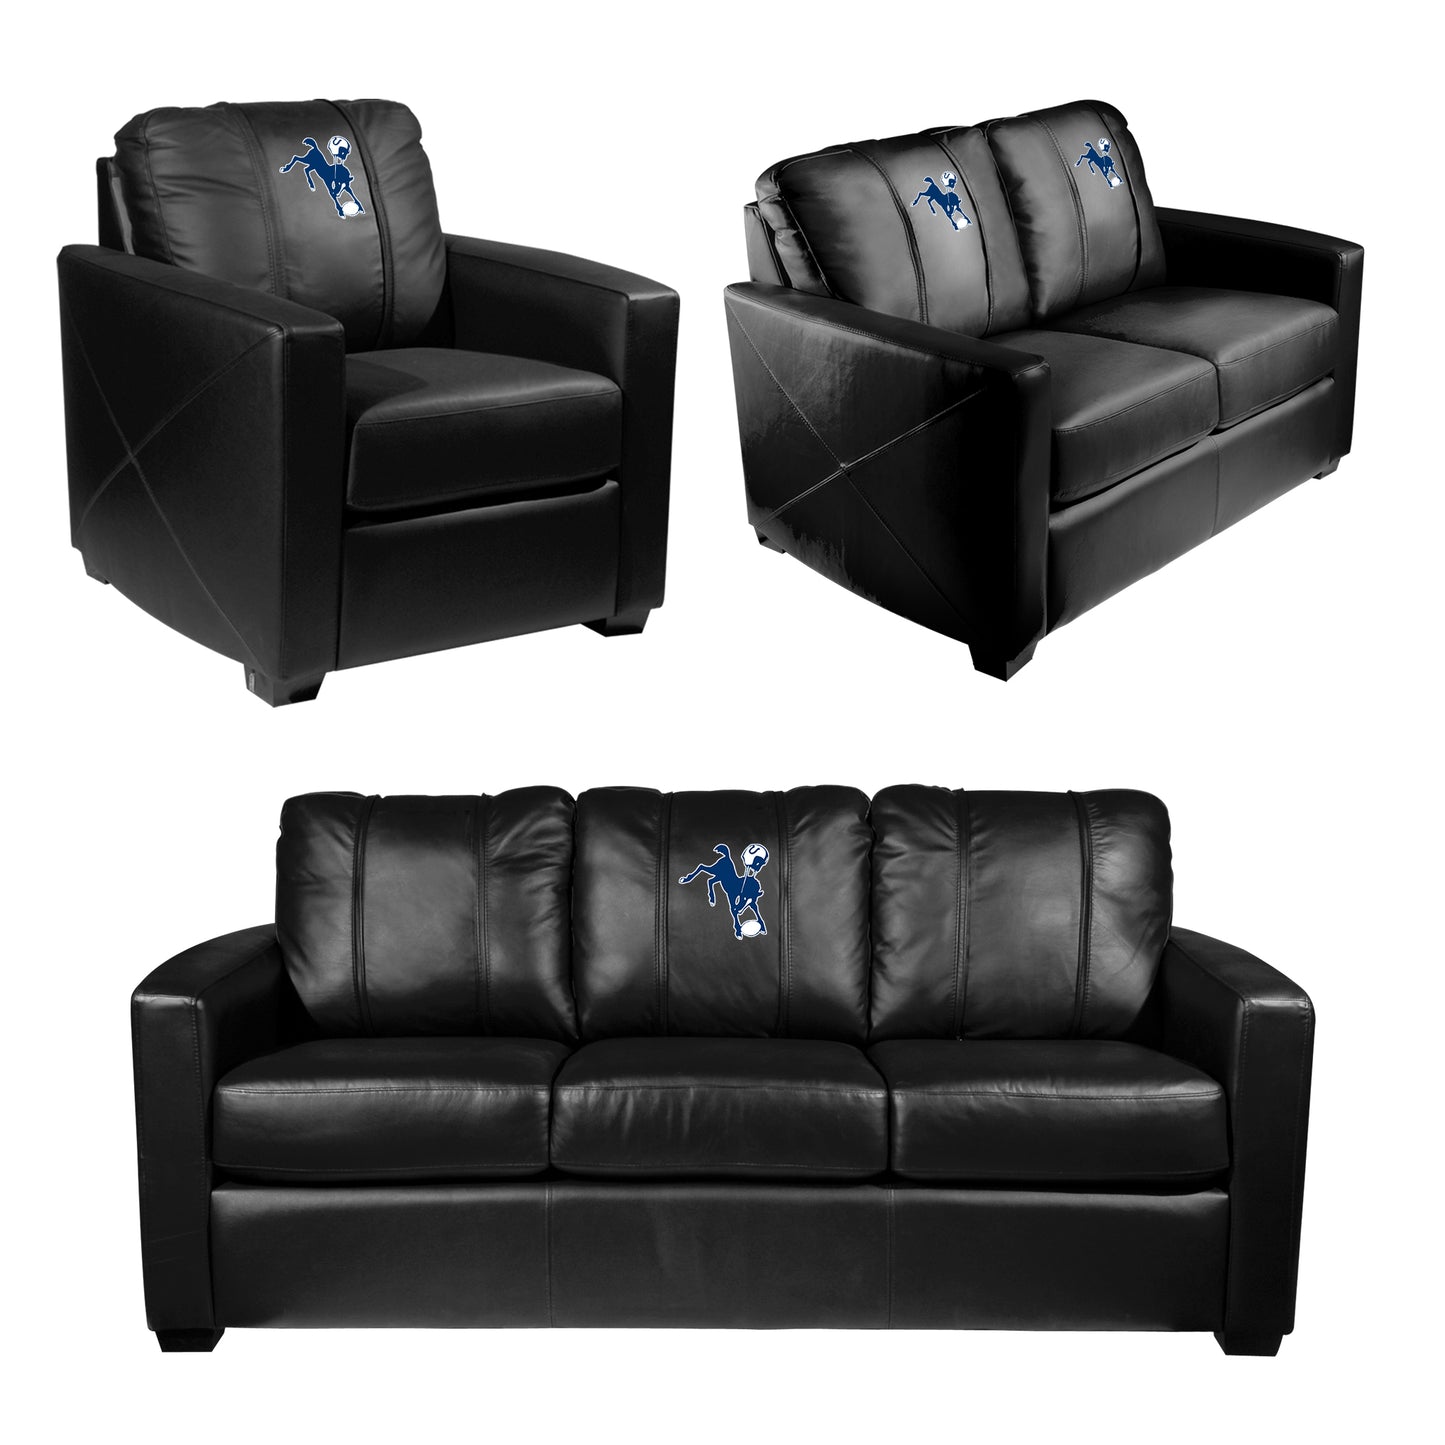 Silver Loveseat with Indianapolis Colts Classic Logo